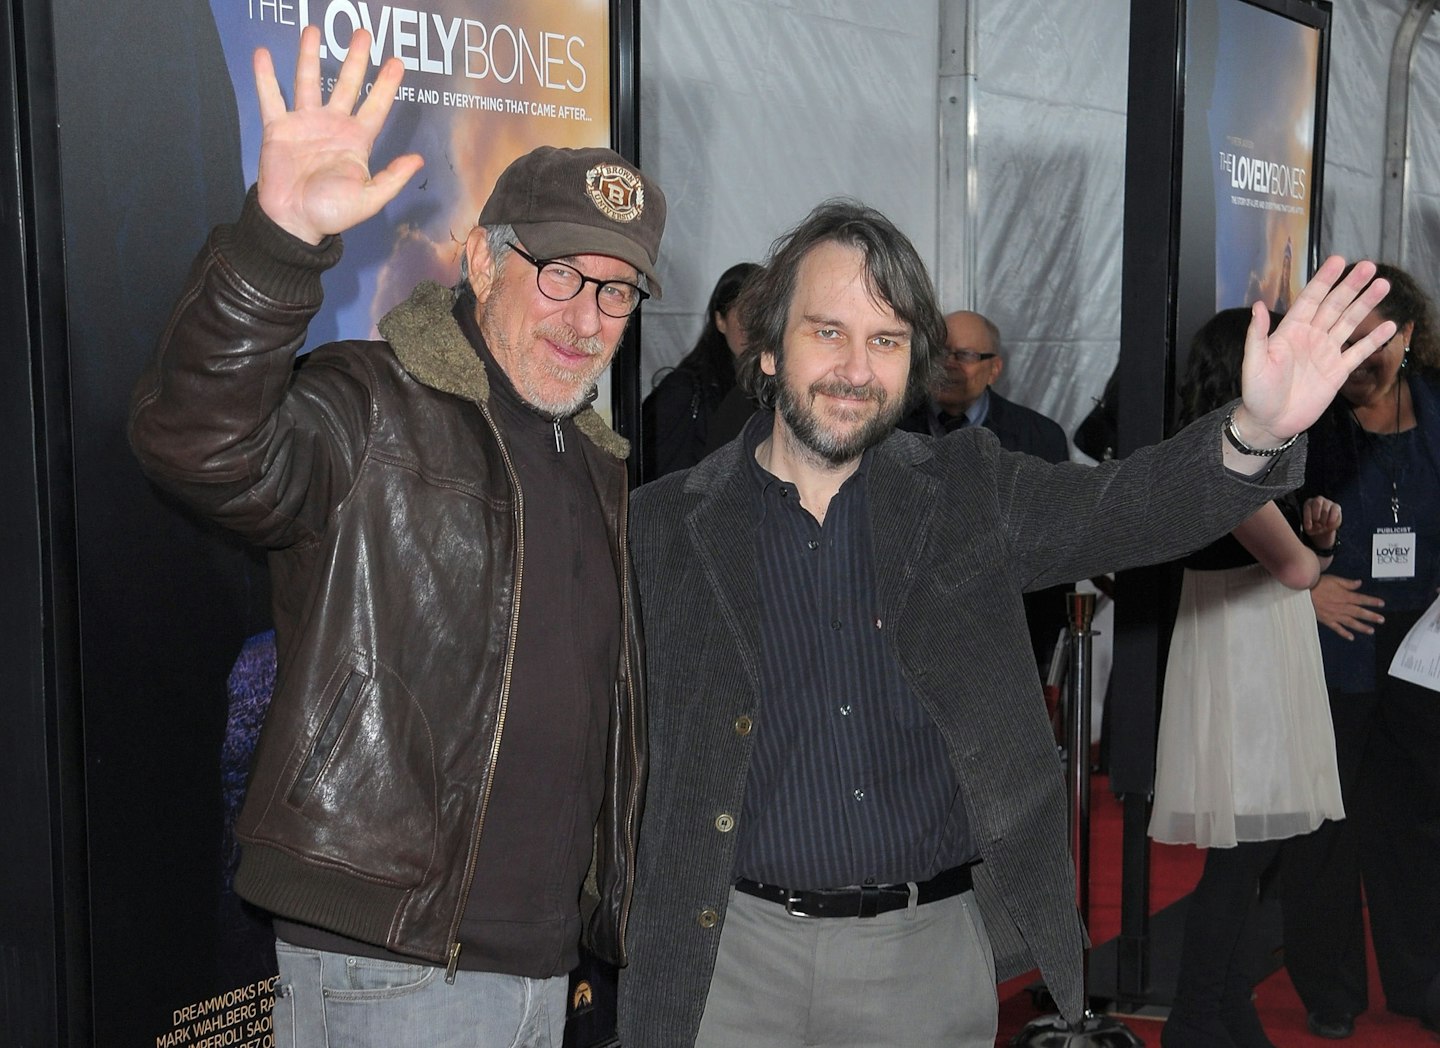 Steven Spielberg and Peter Jackson at the Lovely Bones premiere